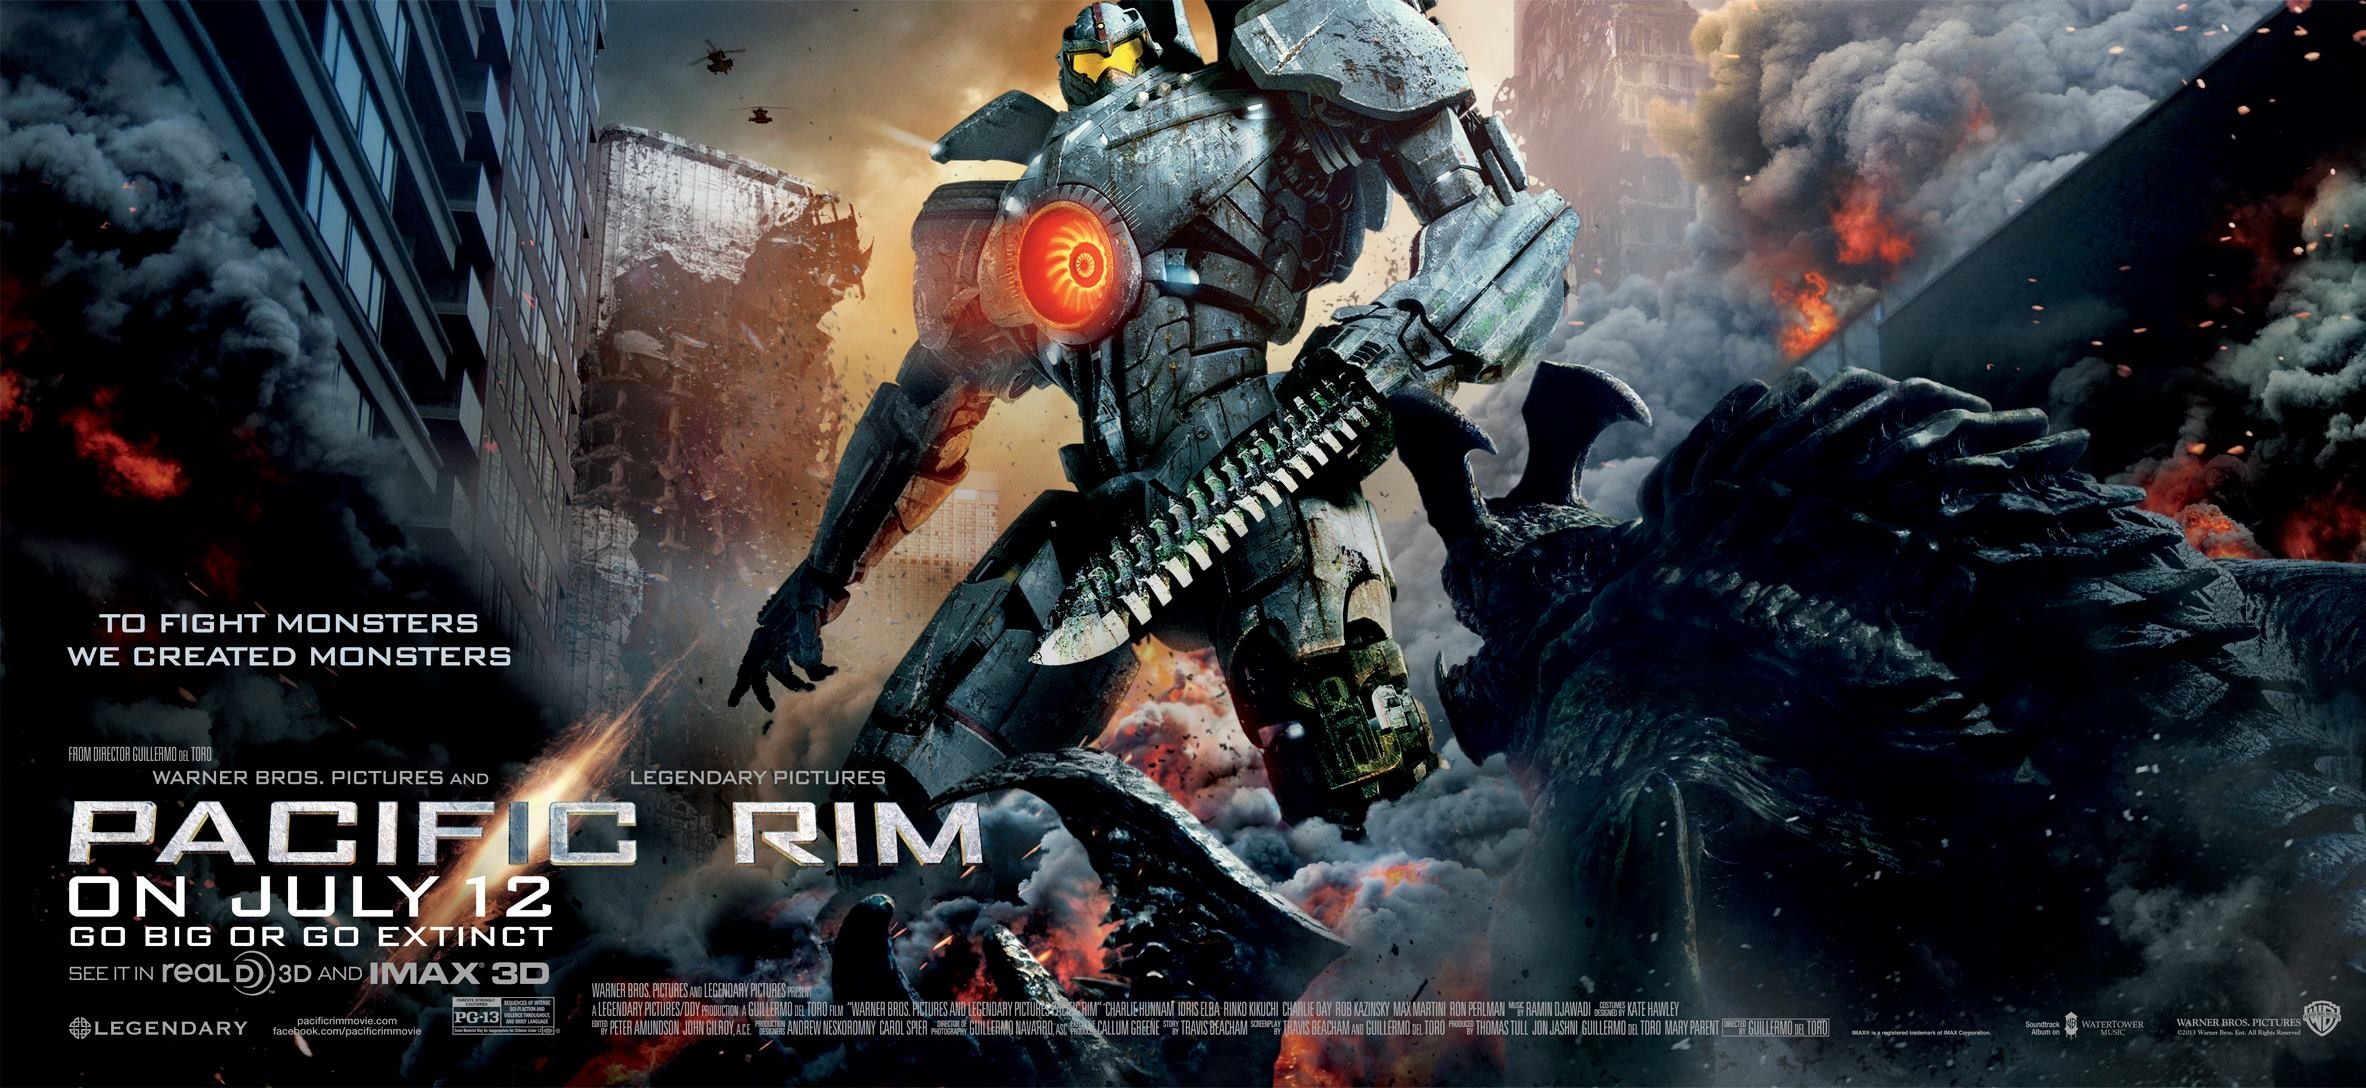 Mega Sized Movie Poster Image for Pacific Rim (#14 of 26)